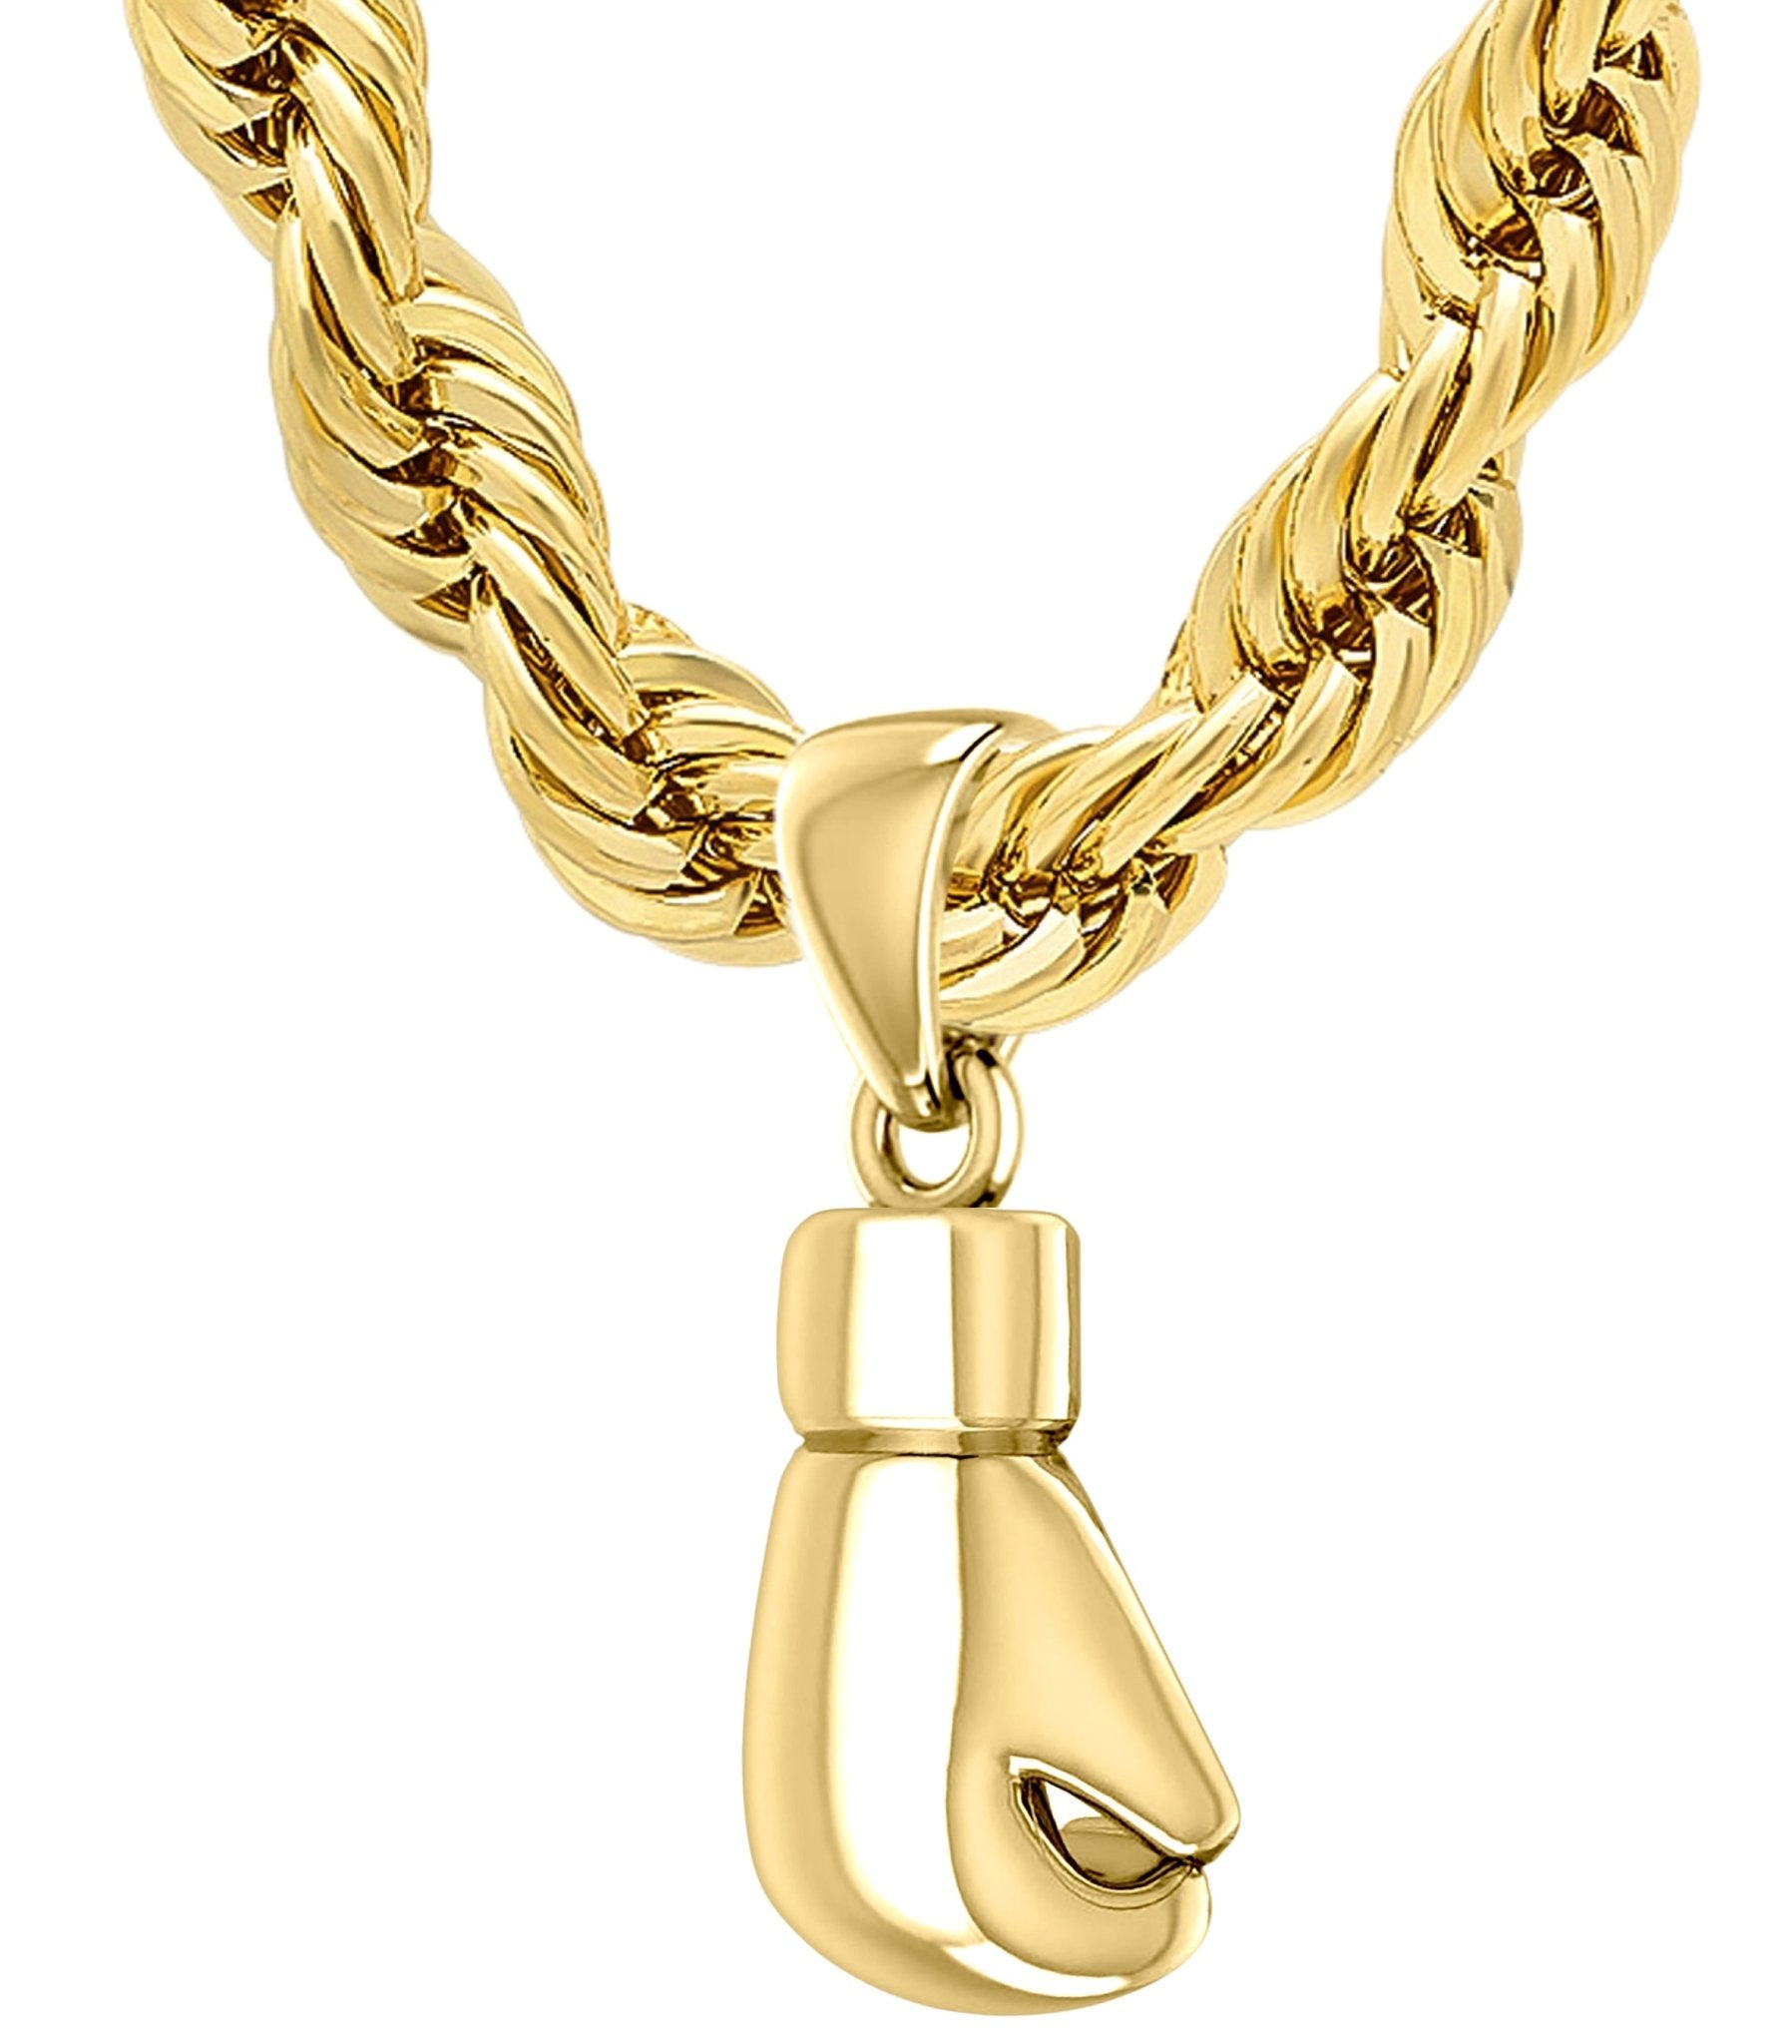 XL 50mm 3D 14K Yellow Gold Single Boxing Glove Pendant Necklace, 45g (Pendant Only)! - US Jewels